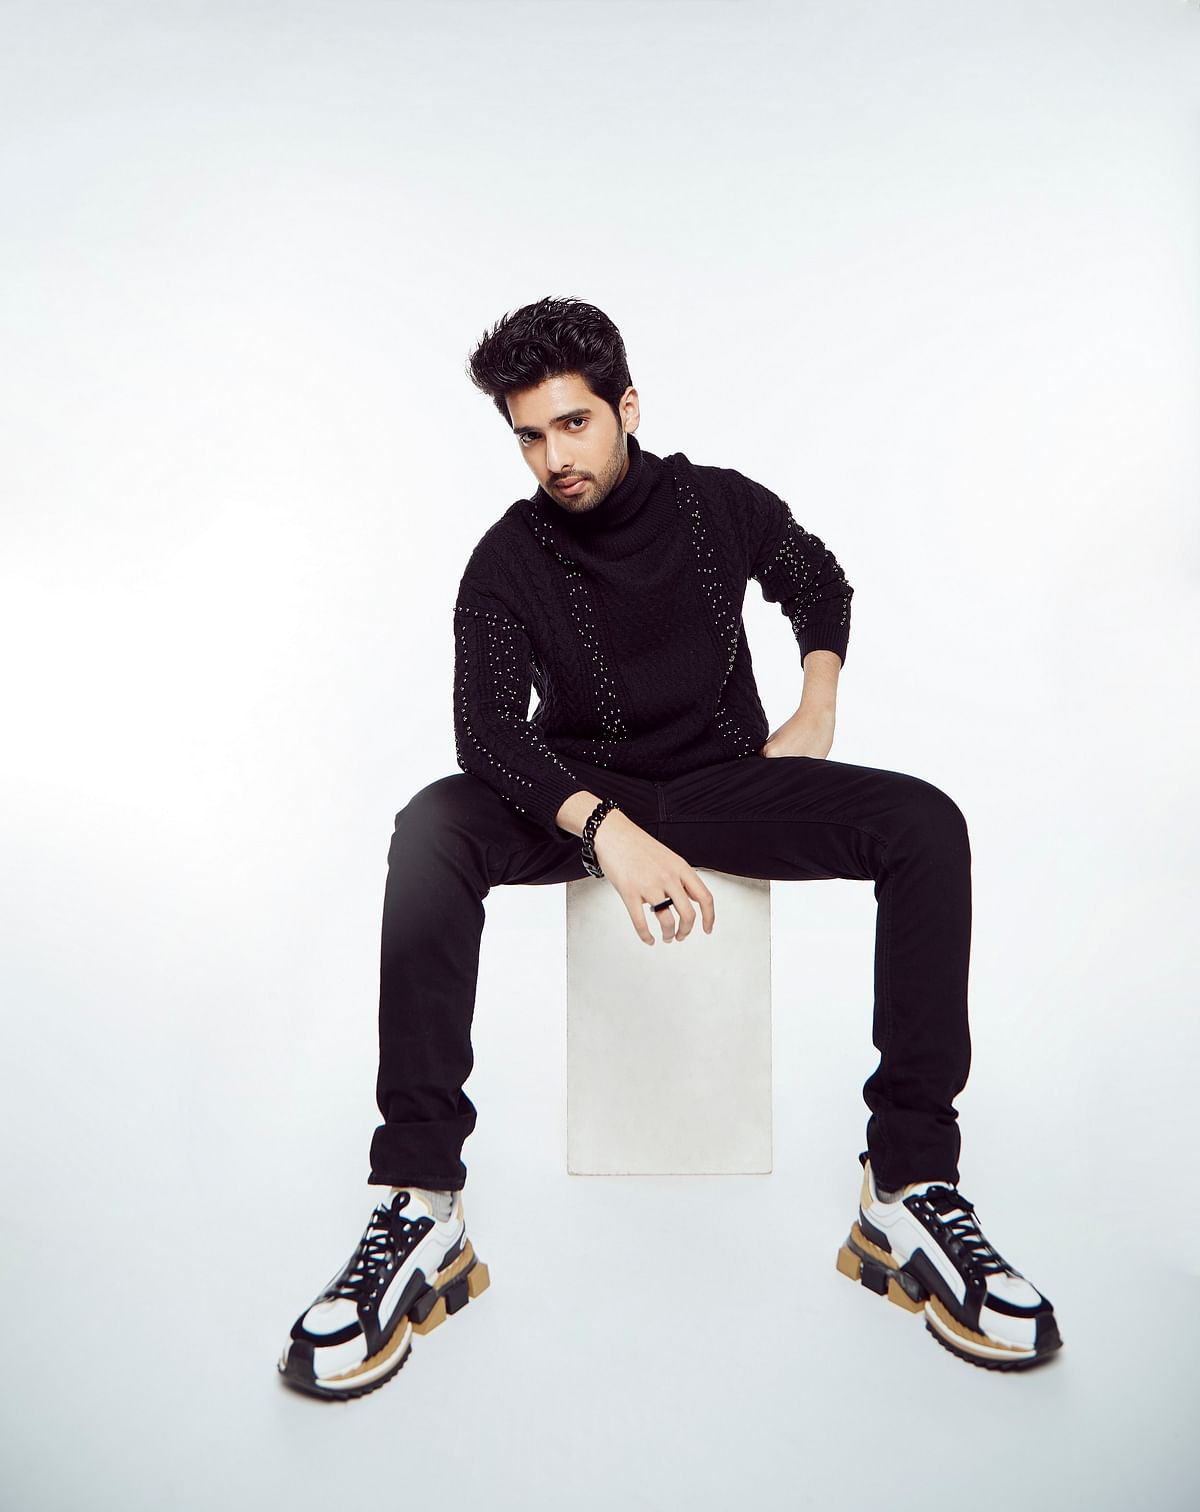 India needs its own independent music industry: Armaan Malik